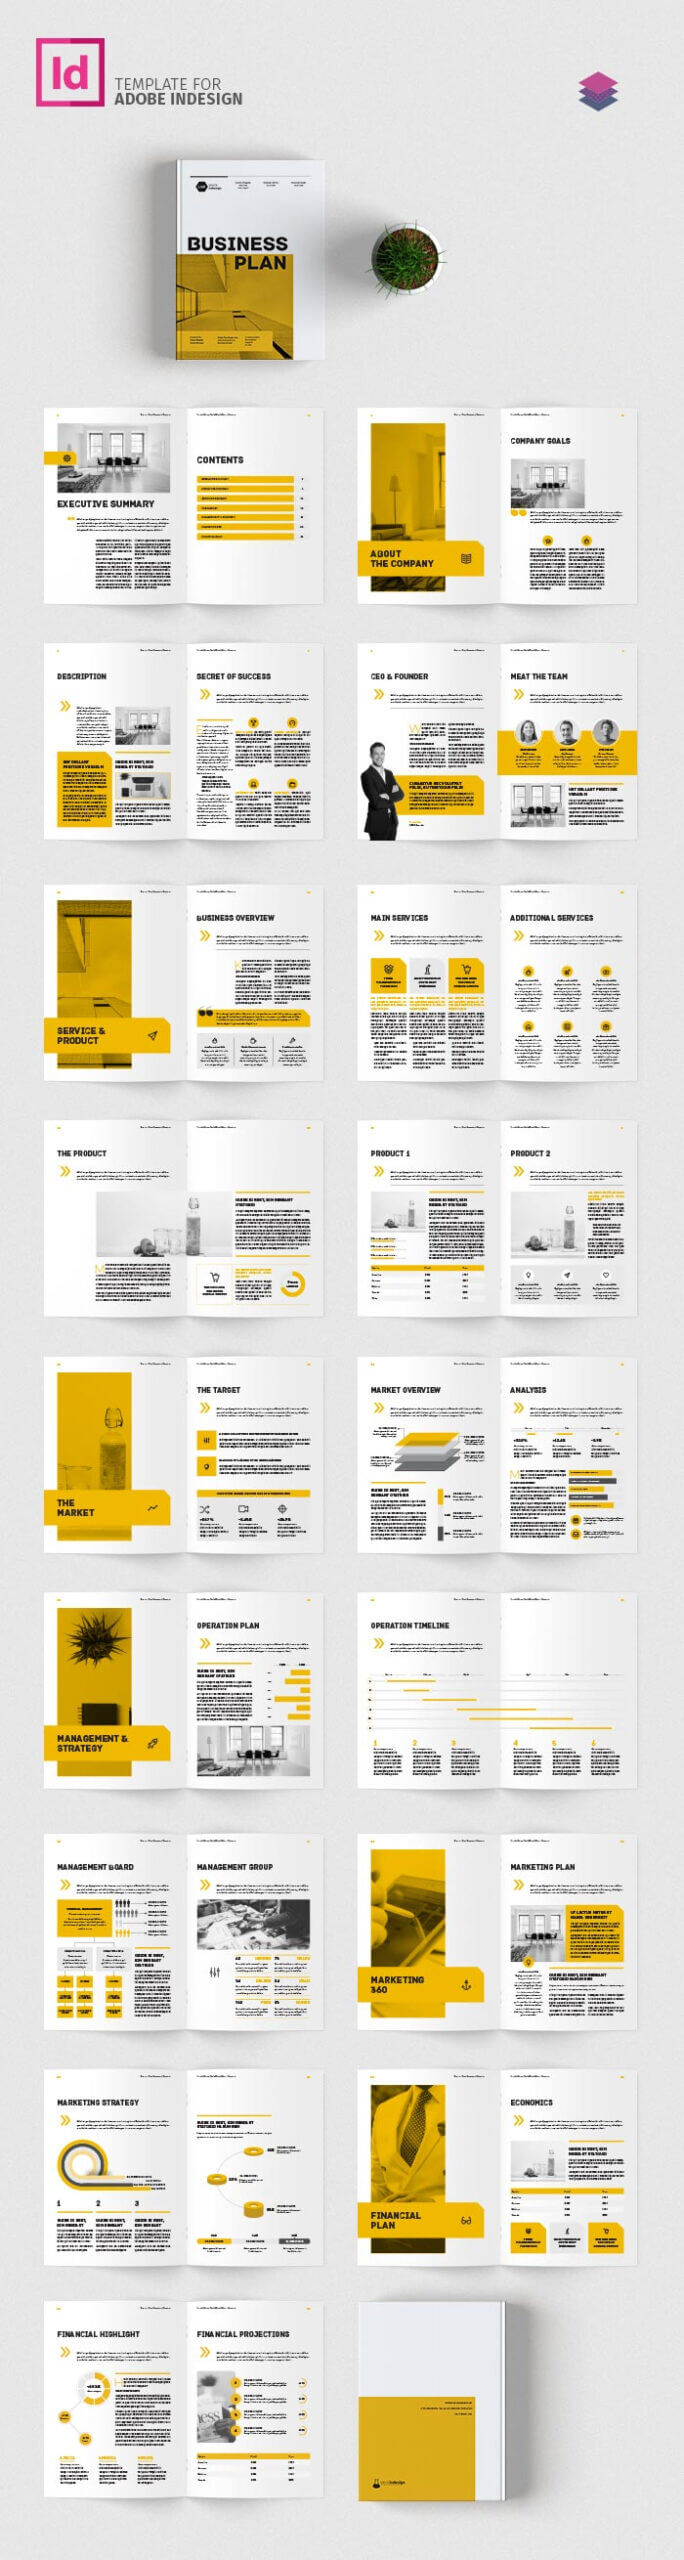 Business Plan In Business Plan Template Indesign